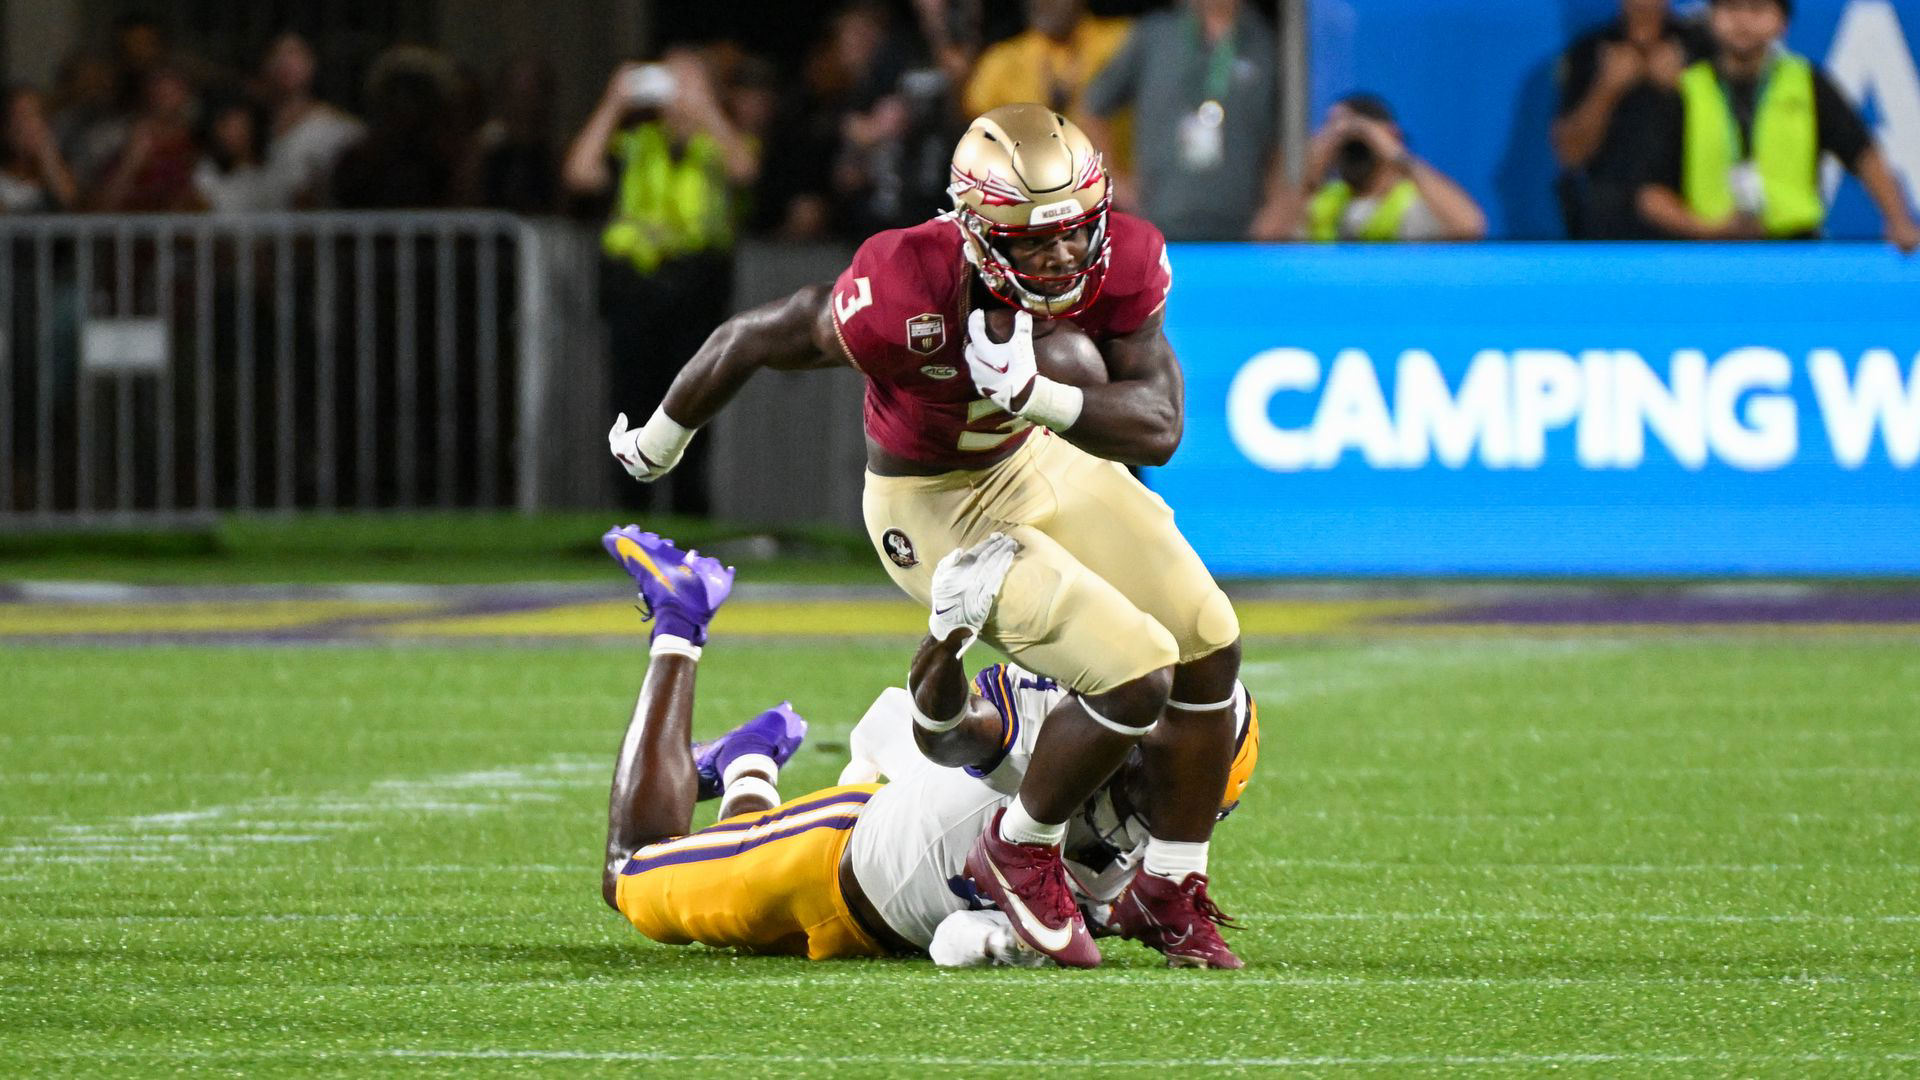 Noles News Where Would You Rank Fsu After Blowout Win Over Lsu